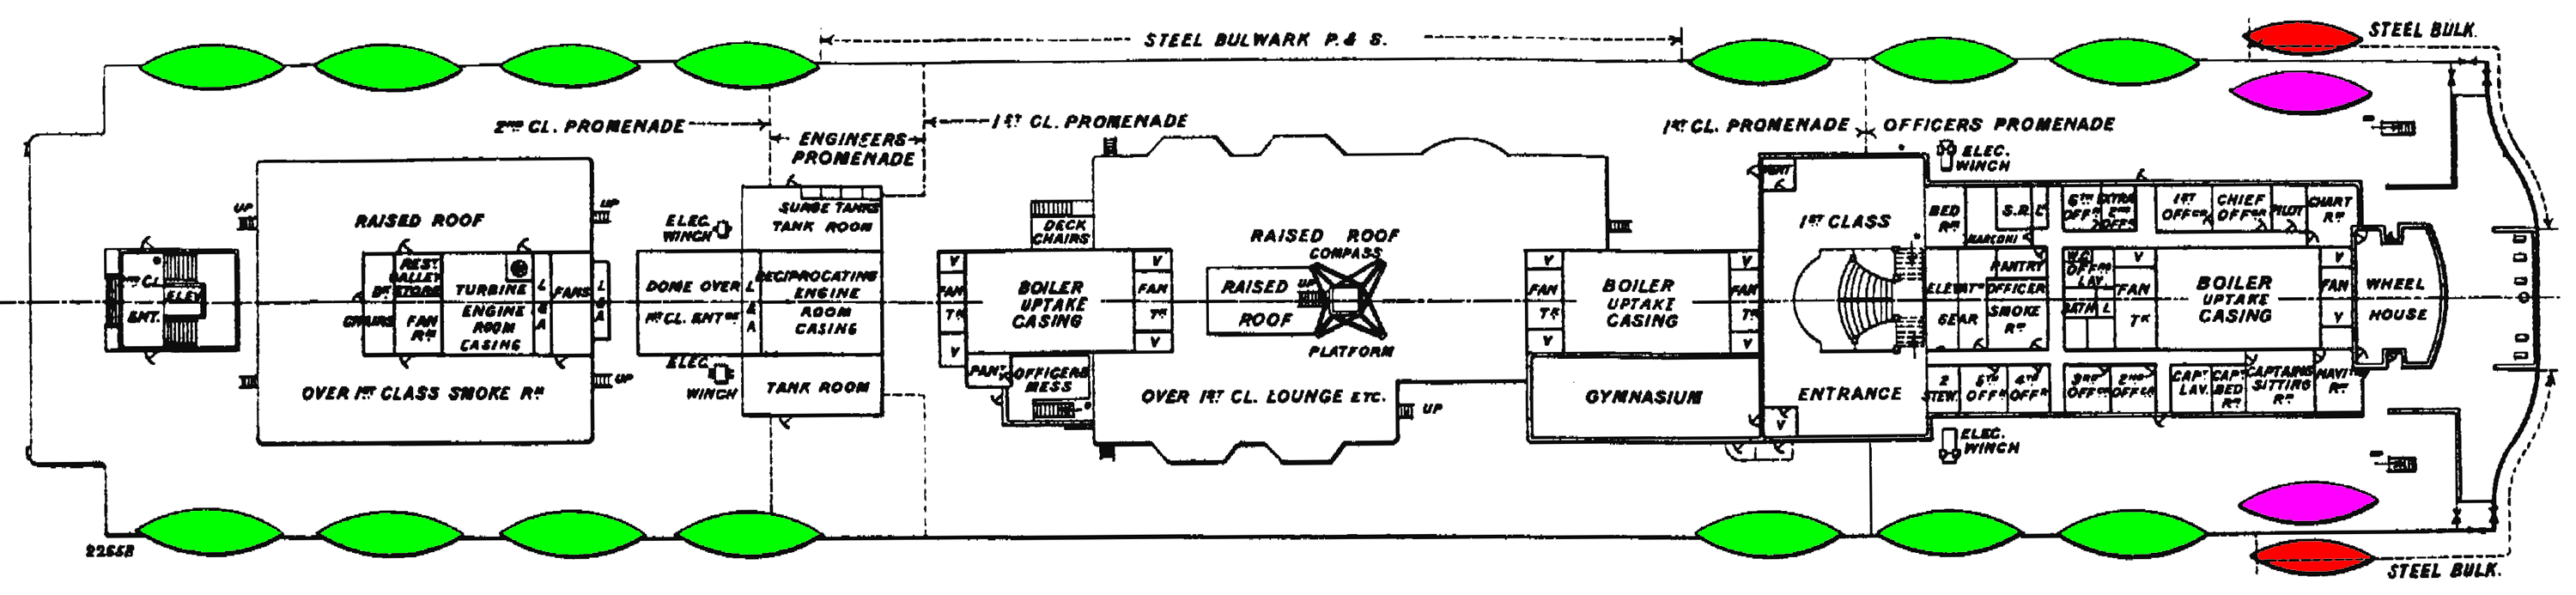 File:Titanic Boat Deck plan with lifeboats.png - Wikipedia, the free 